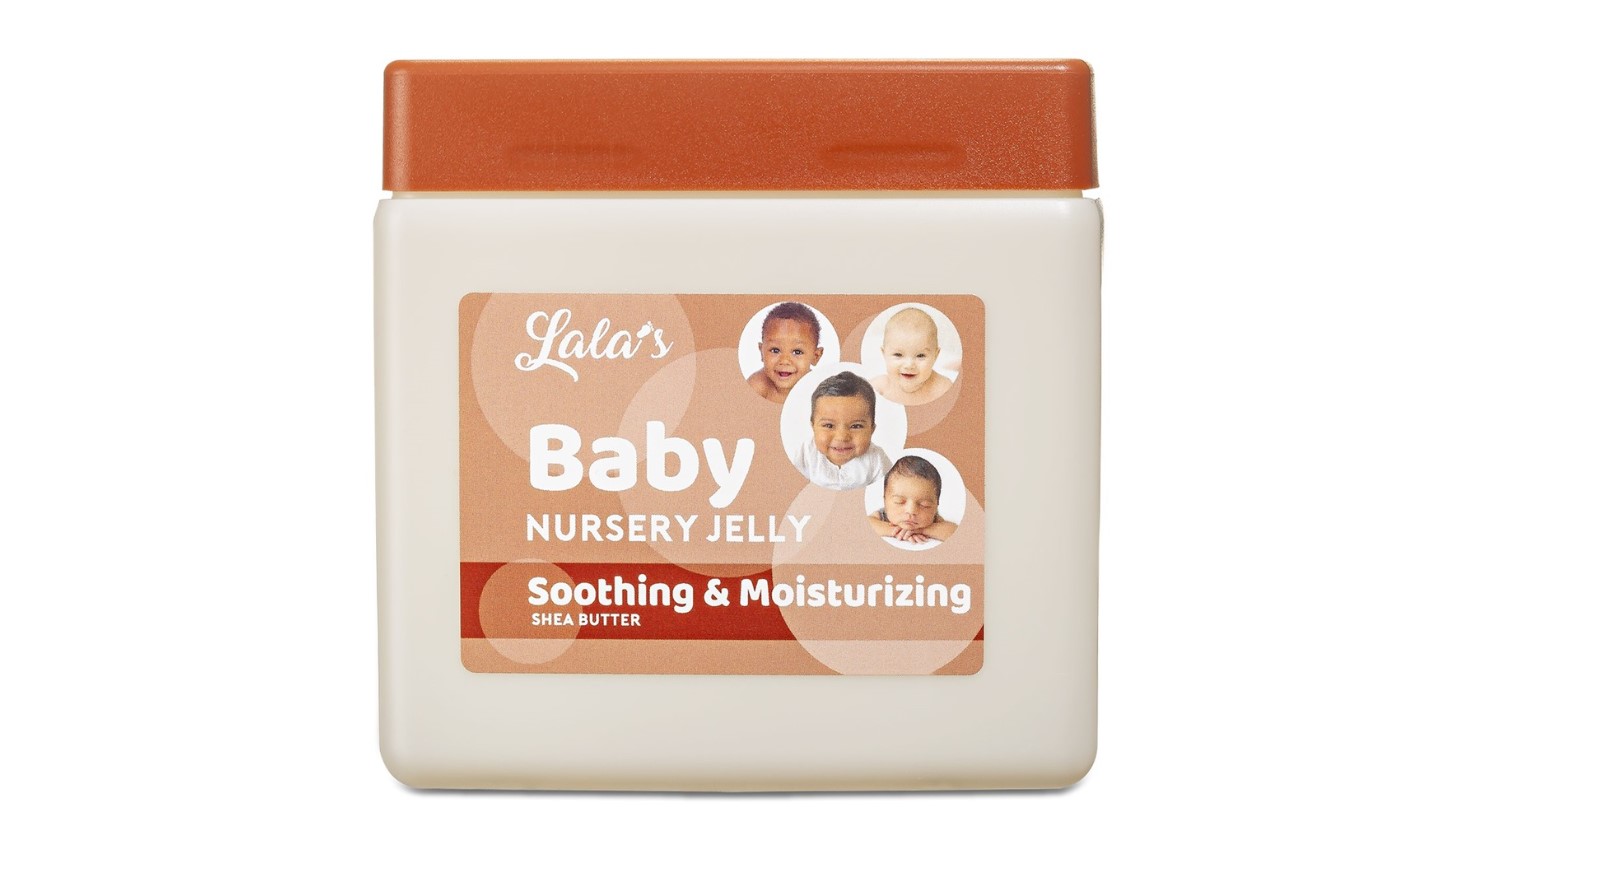 Lala’s Baby Jelly Shea Butter (brown)368g